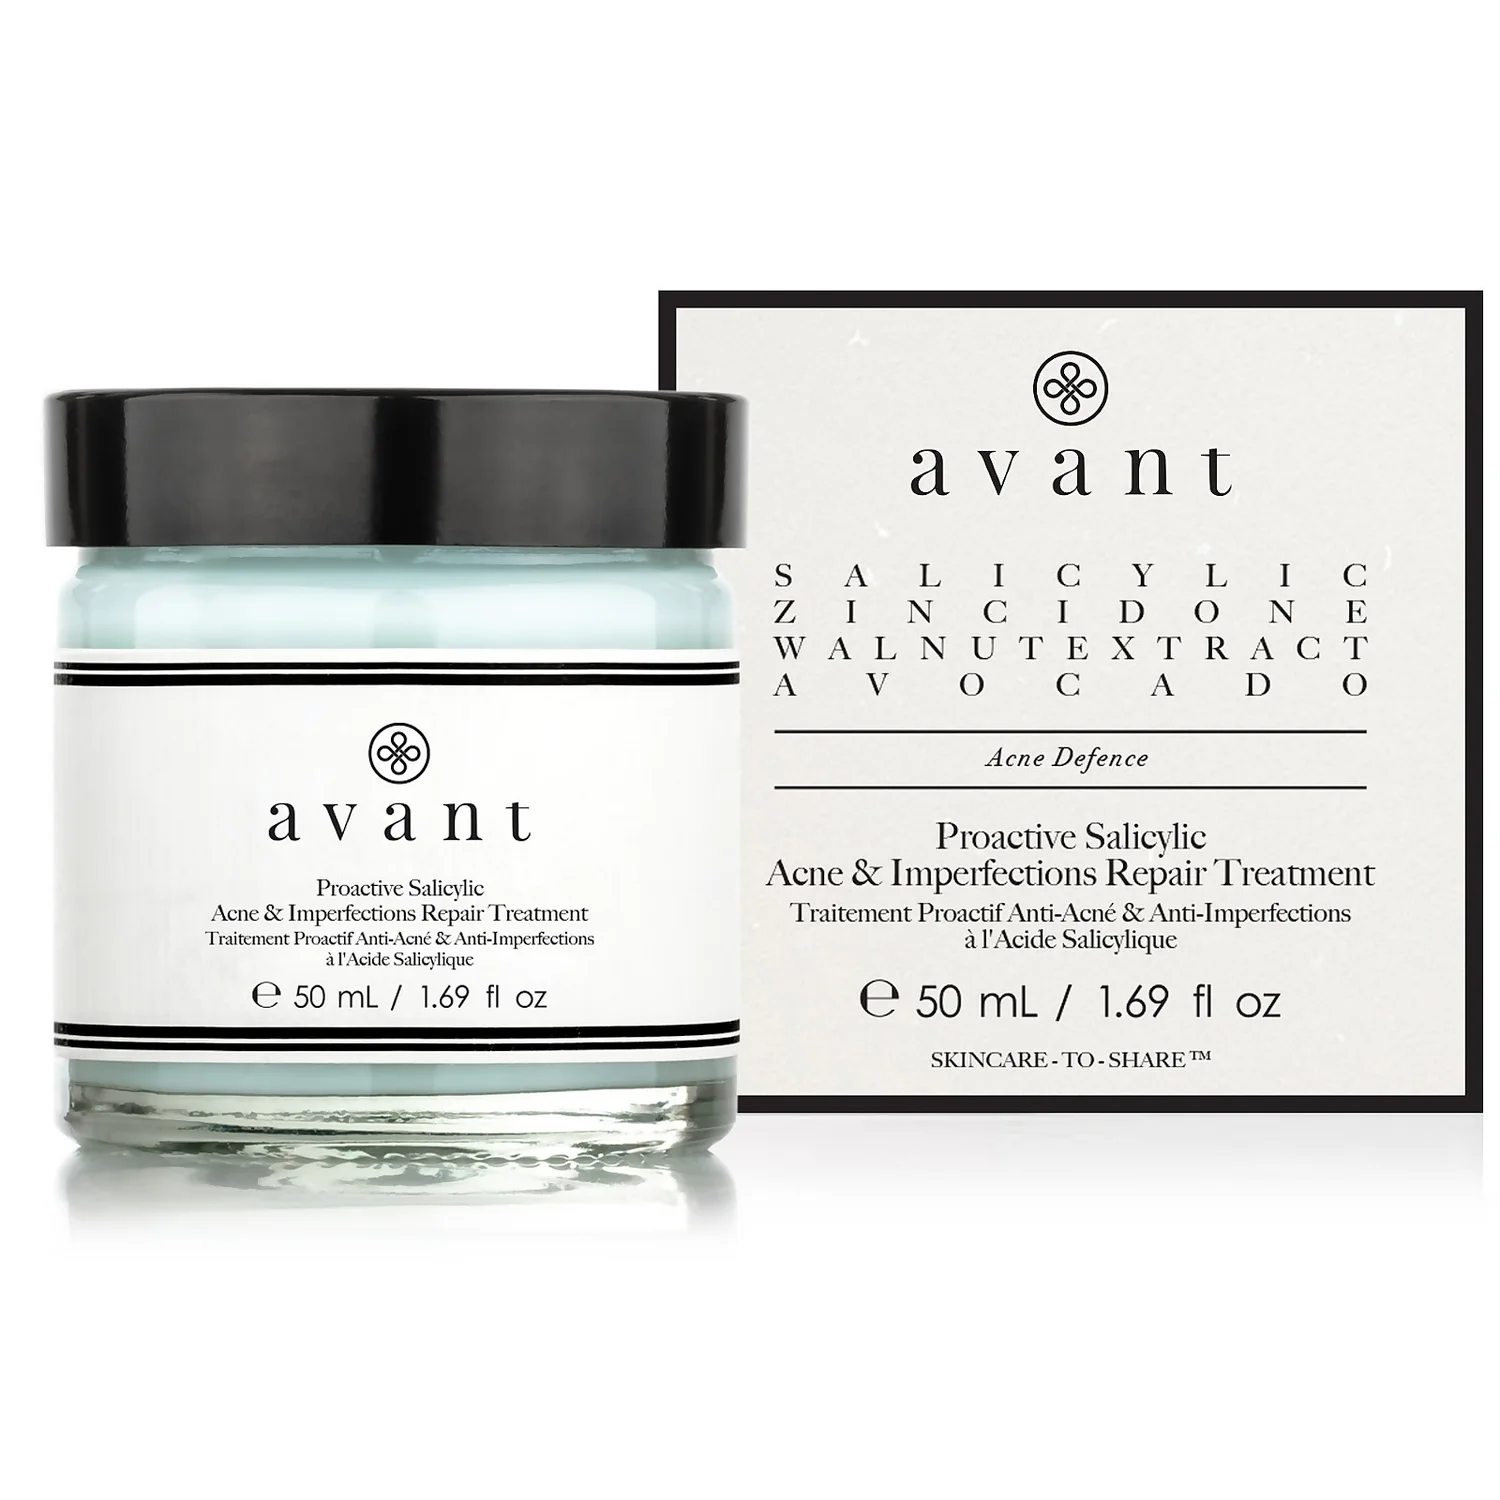 Avant Skincare Proactive Salicylic Acne and Imperfections Repair Treatment 50ml
